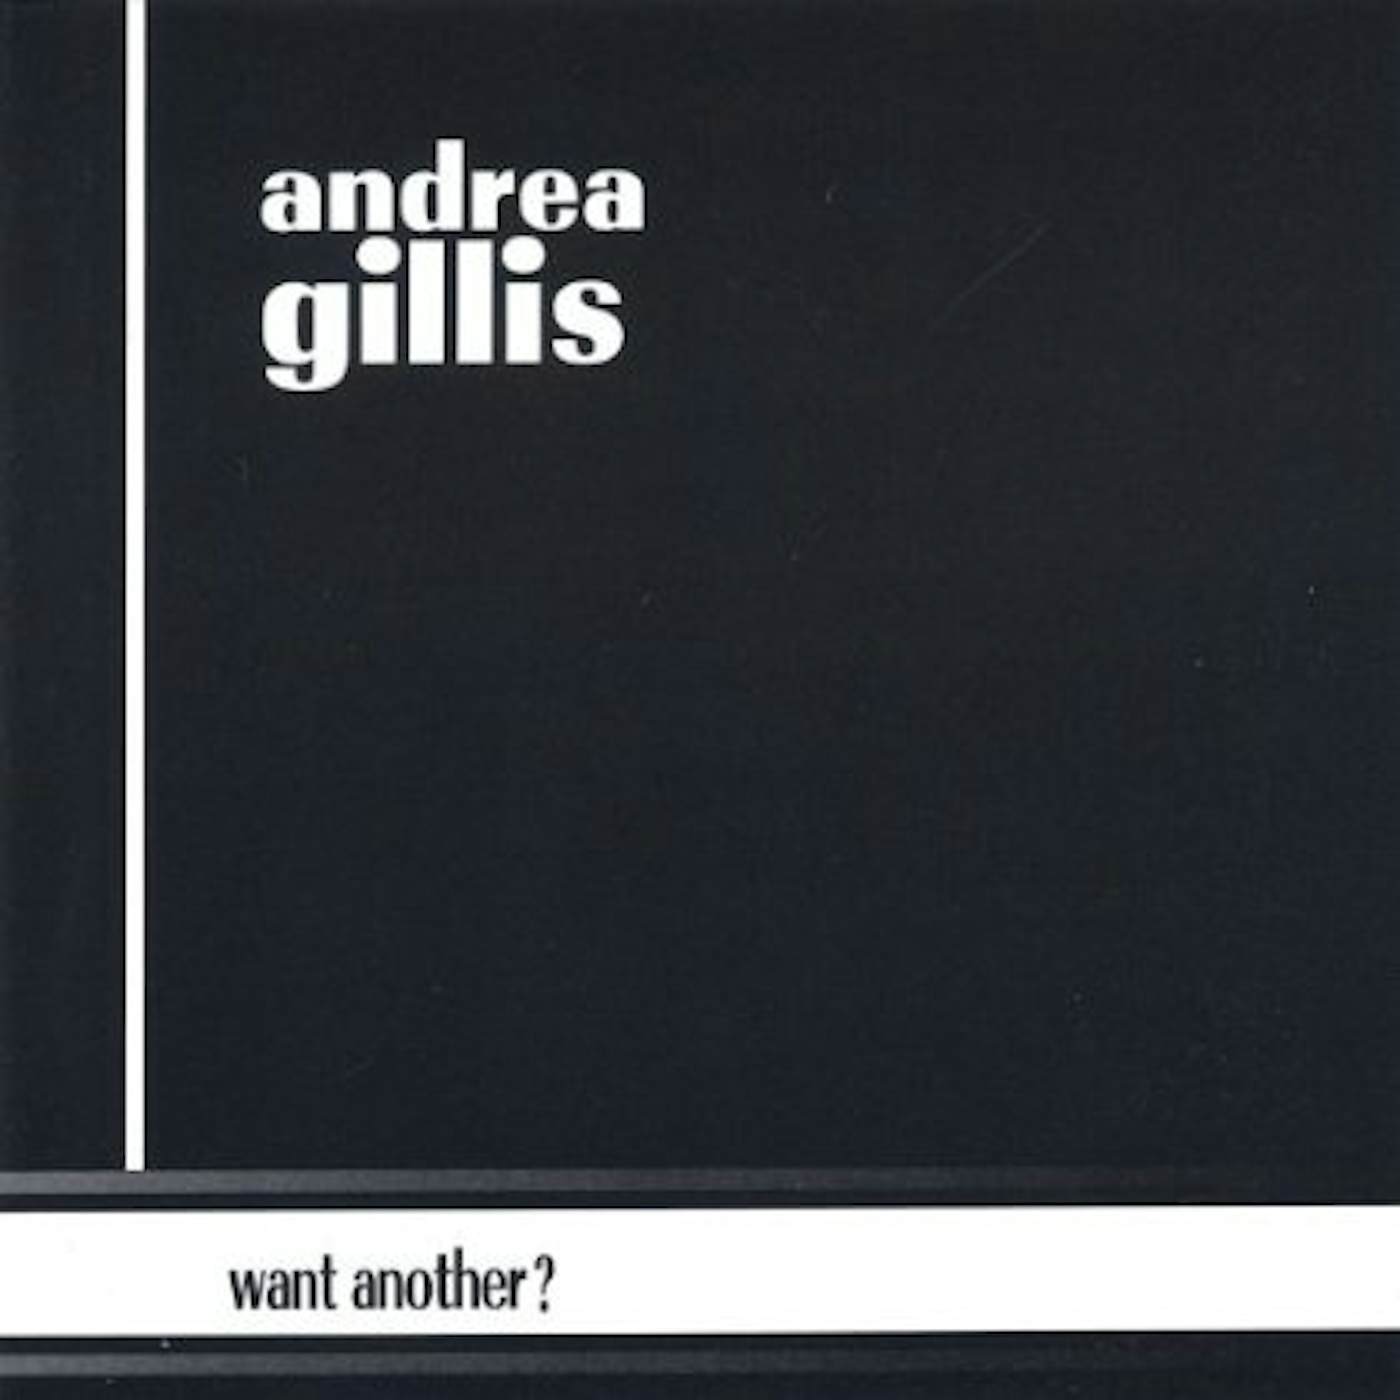 Andrea Gillis WANT ANOTHER ? CD